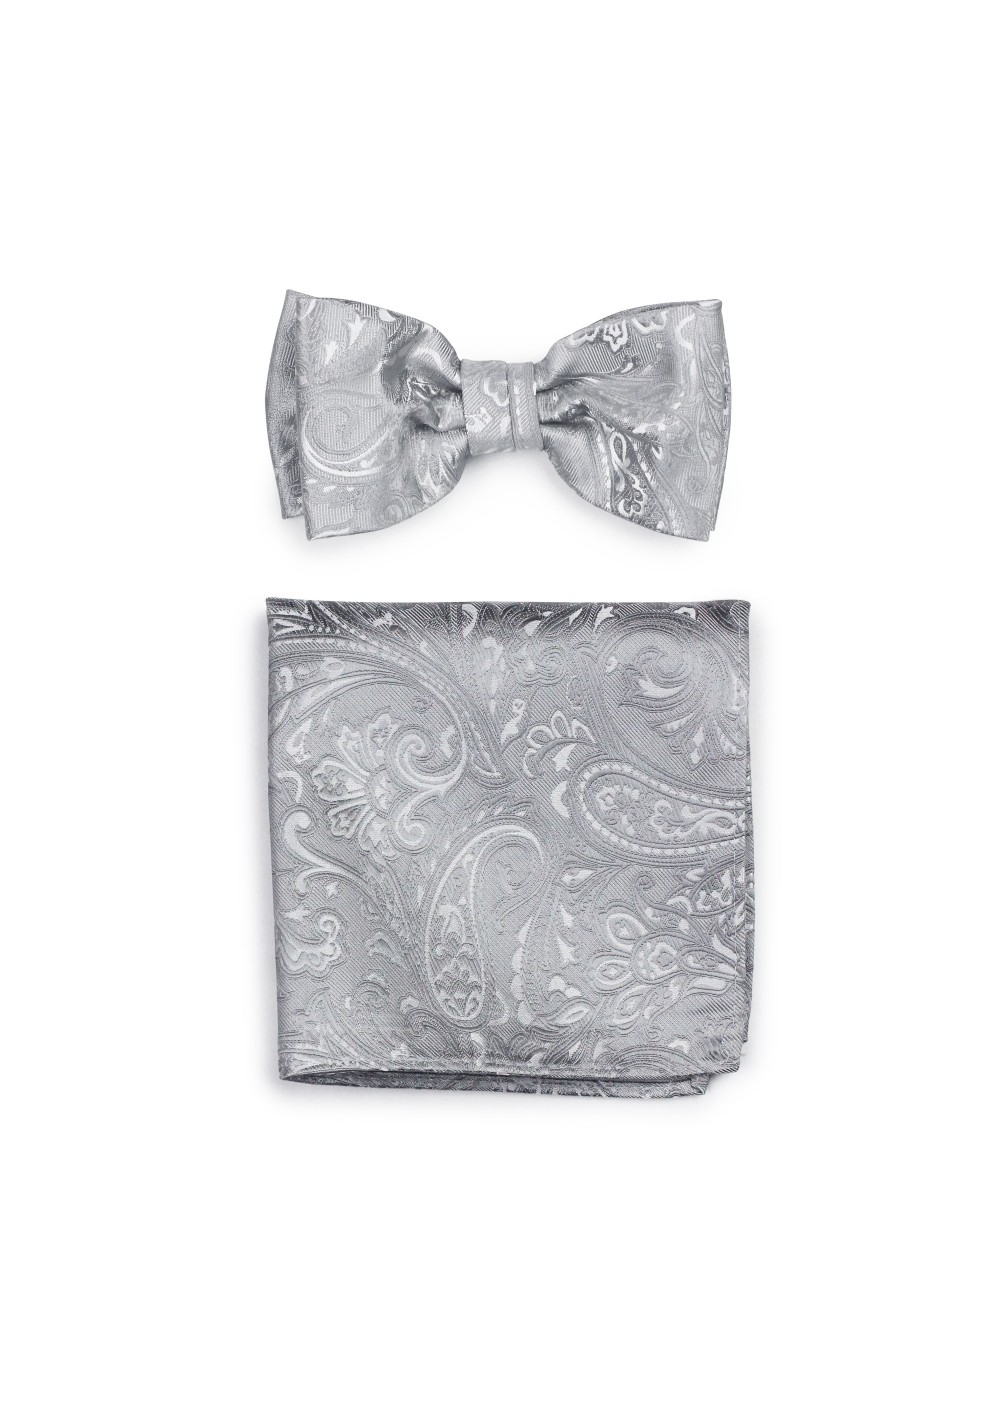 Dressy Paisley Bow Tie and Pocket Square Combo Set in Silver